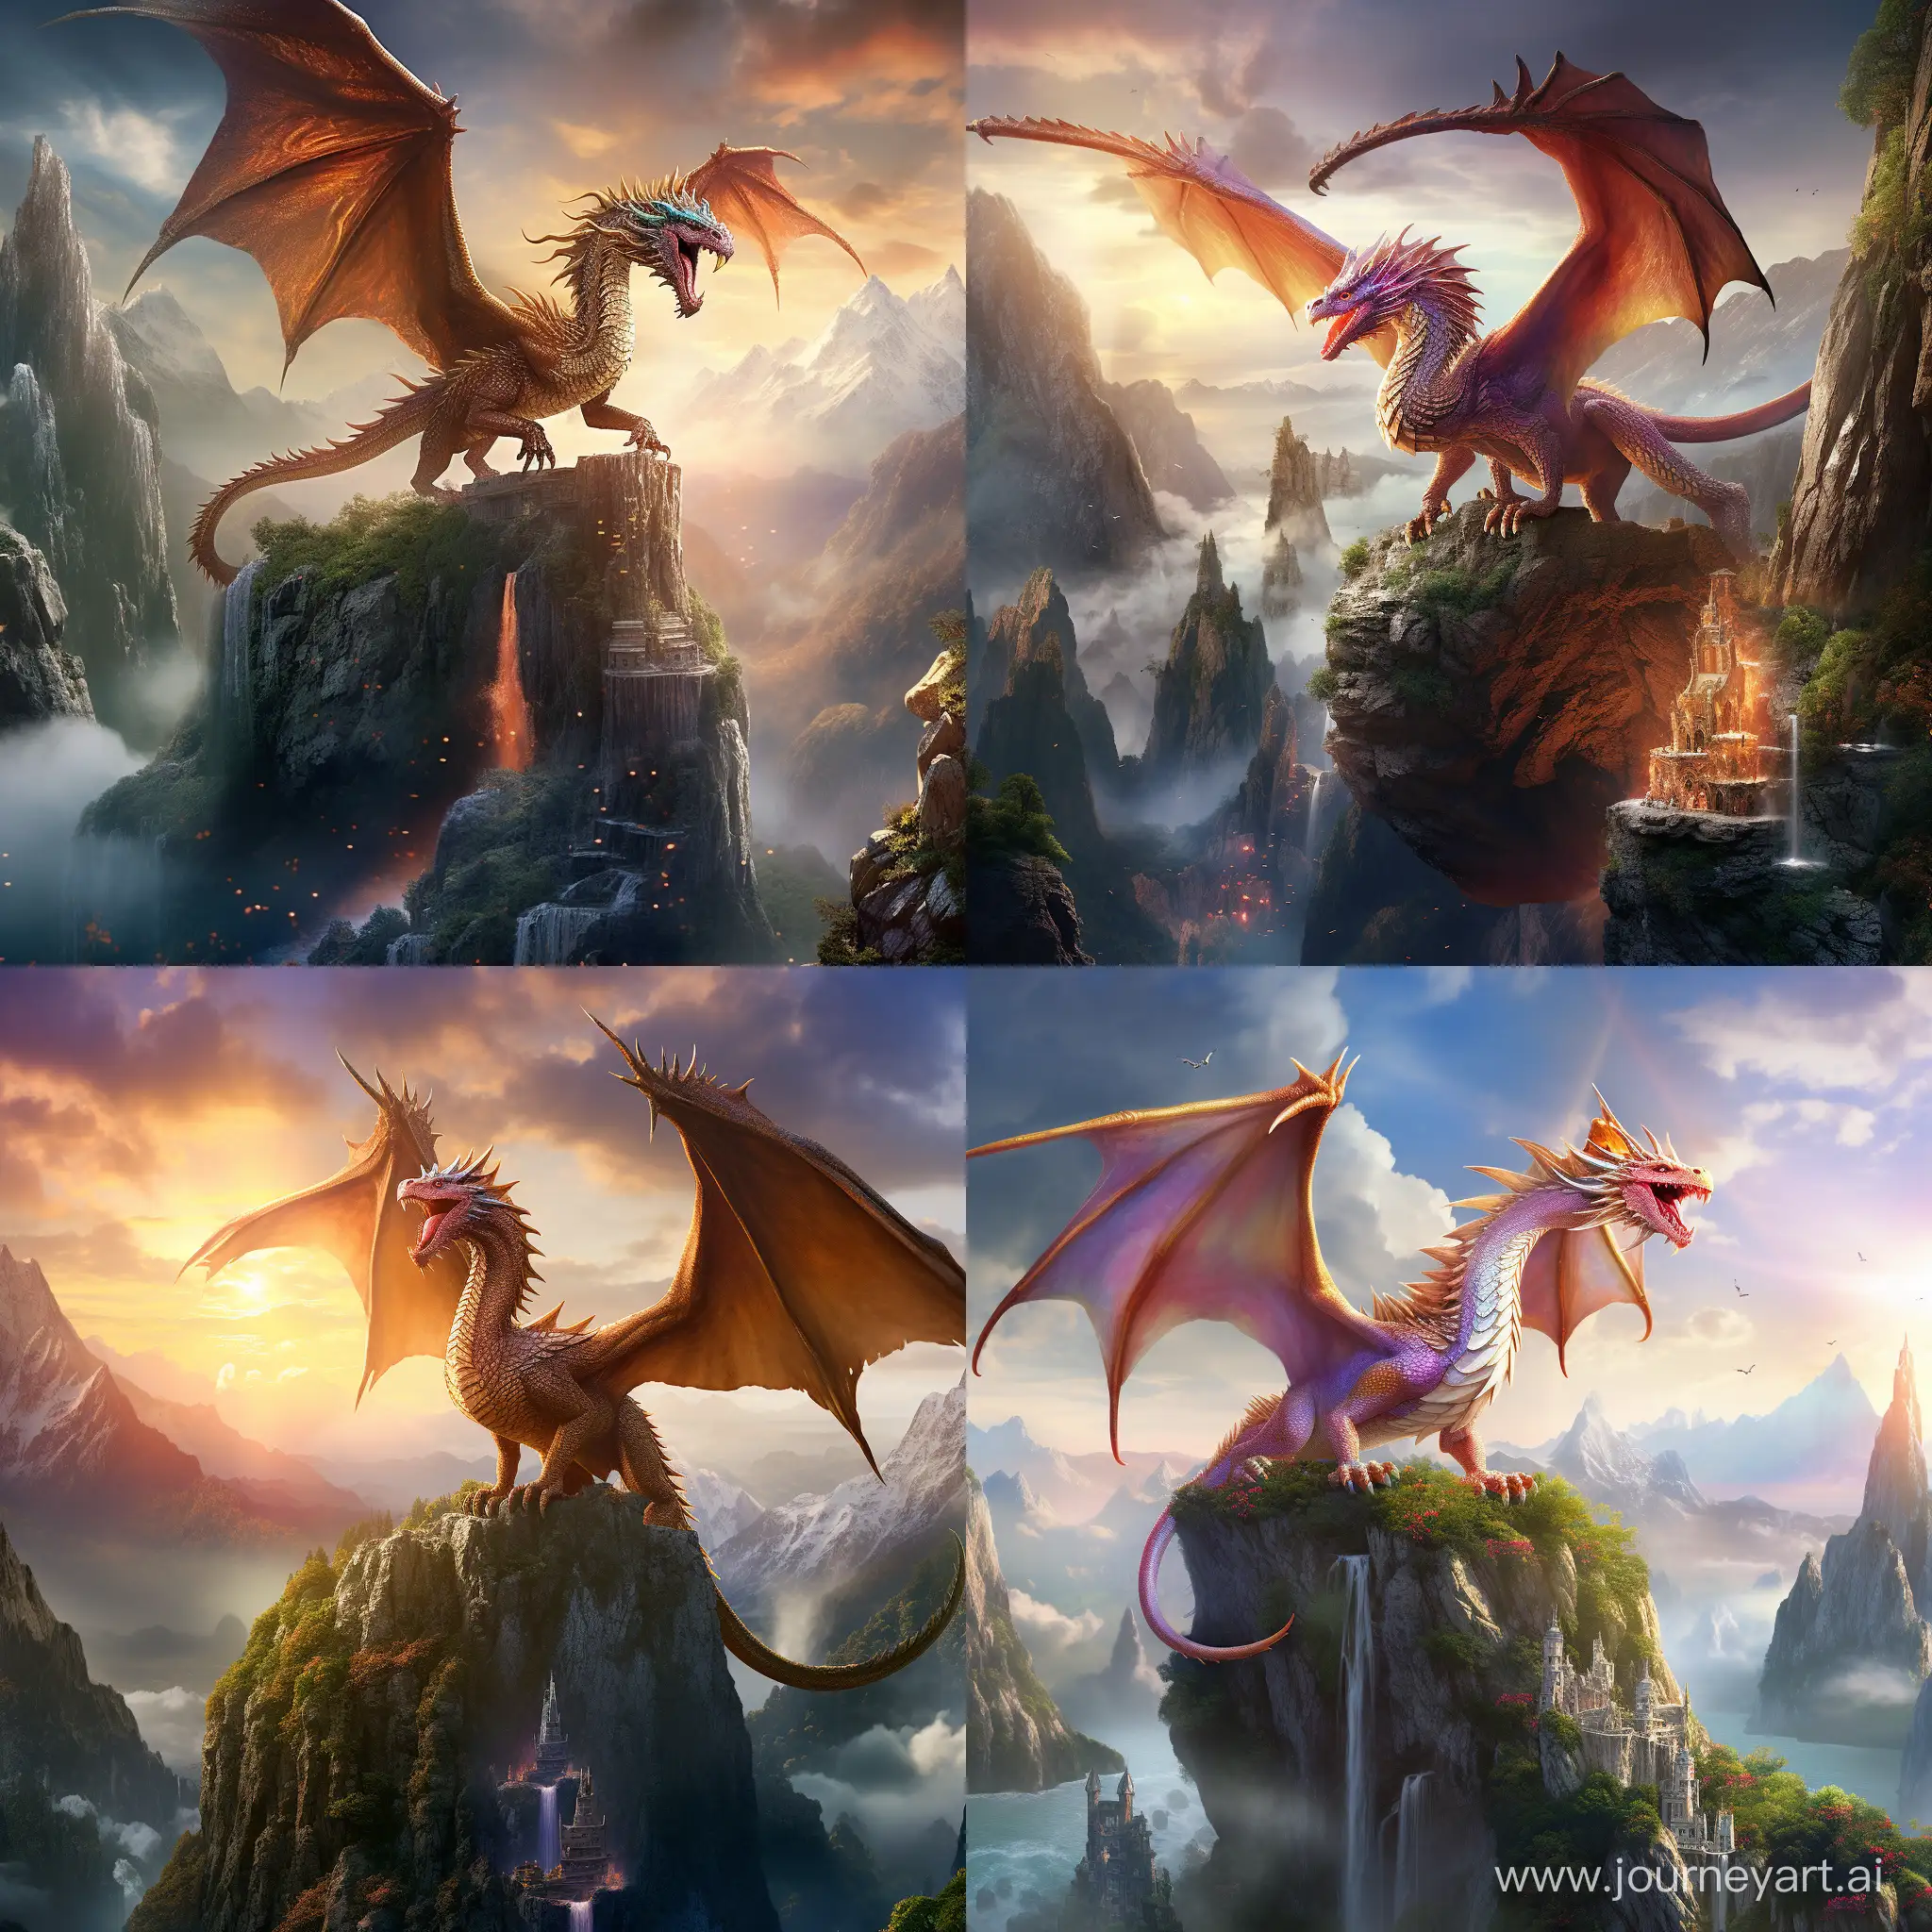 "Craft an awe-inspiring scene of a majestic dragon soaring gracefully above an ancient, mist-shrouded mountain range. The dragon's iridescent scales catch the sunlight, creating a mesmerizing display, while below, a mythical landscape unfolds with cascading waterfalls, lush forests, and hidden caves, all enveloped in an enchanting atmosphere."